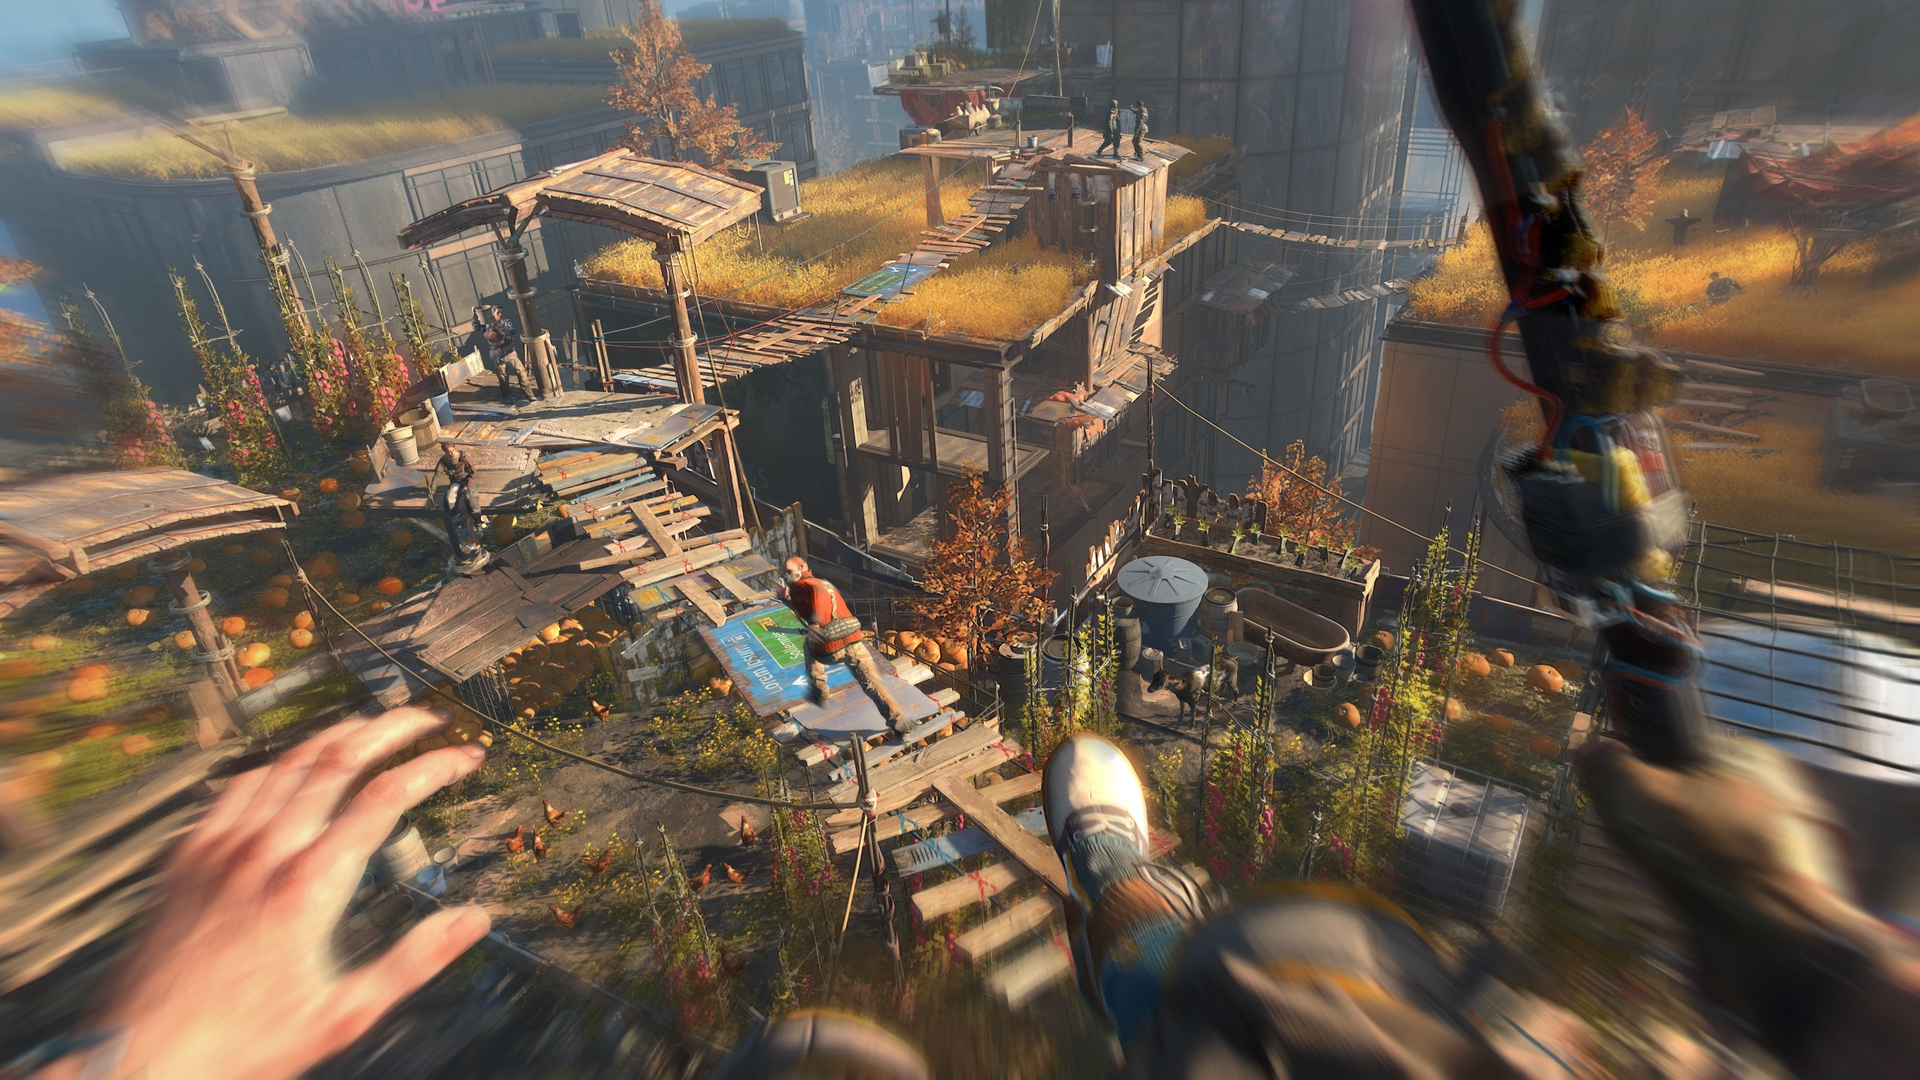 In this article, we are going to be covering the new Dying Light 2 update, which introduces many new features to the popular survival game. 